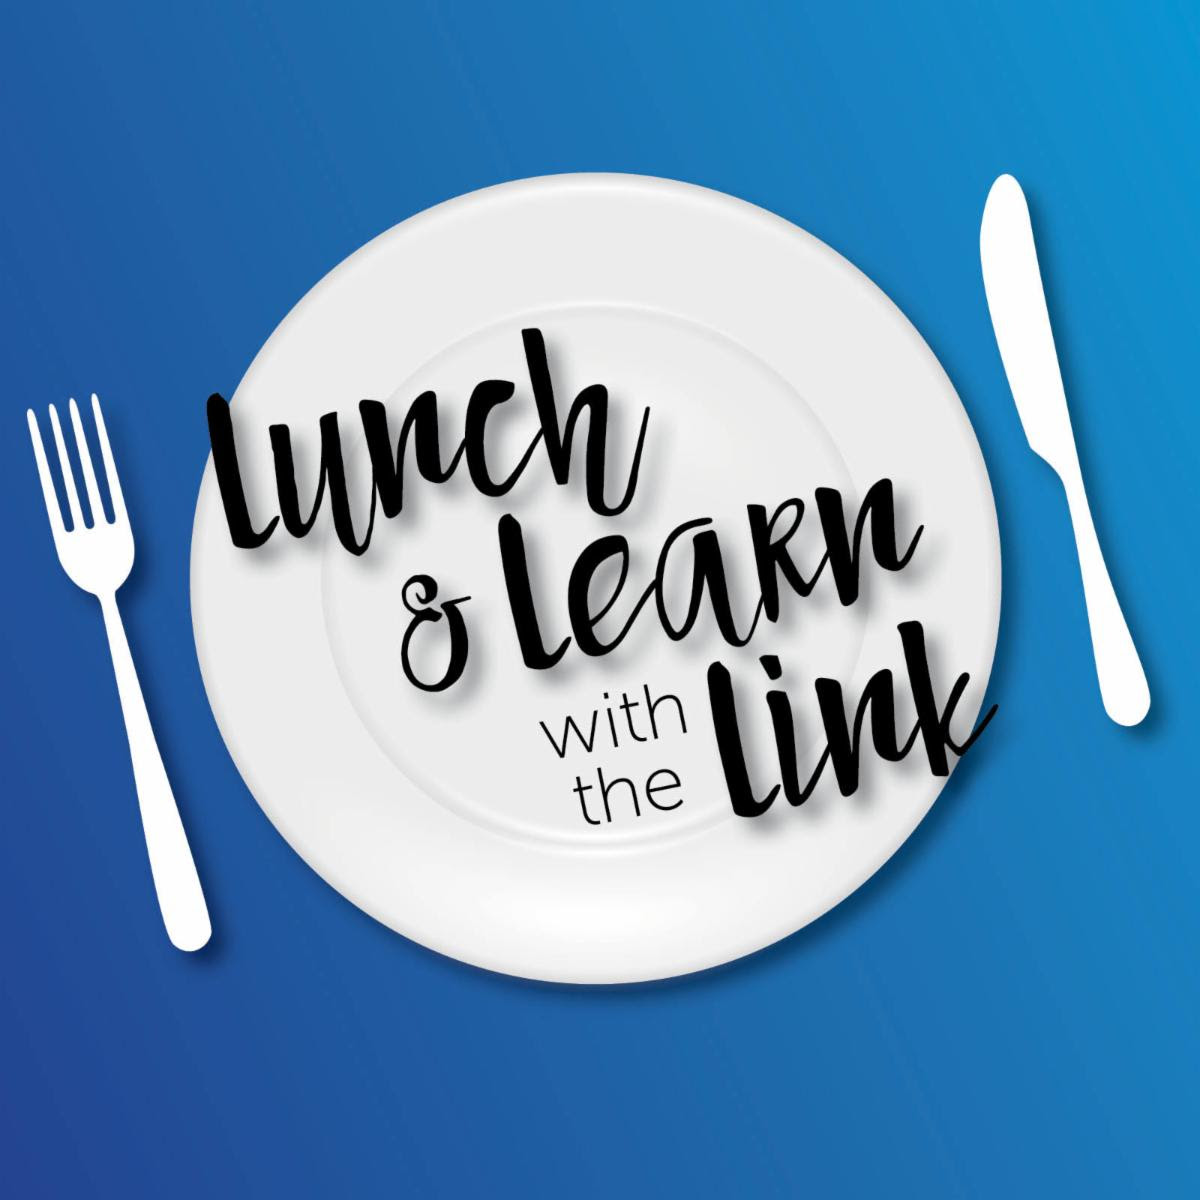 Pediatric Cancer and Blood Cancer Awareness Month lunch and learn